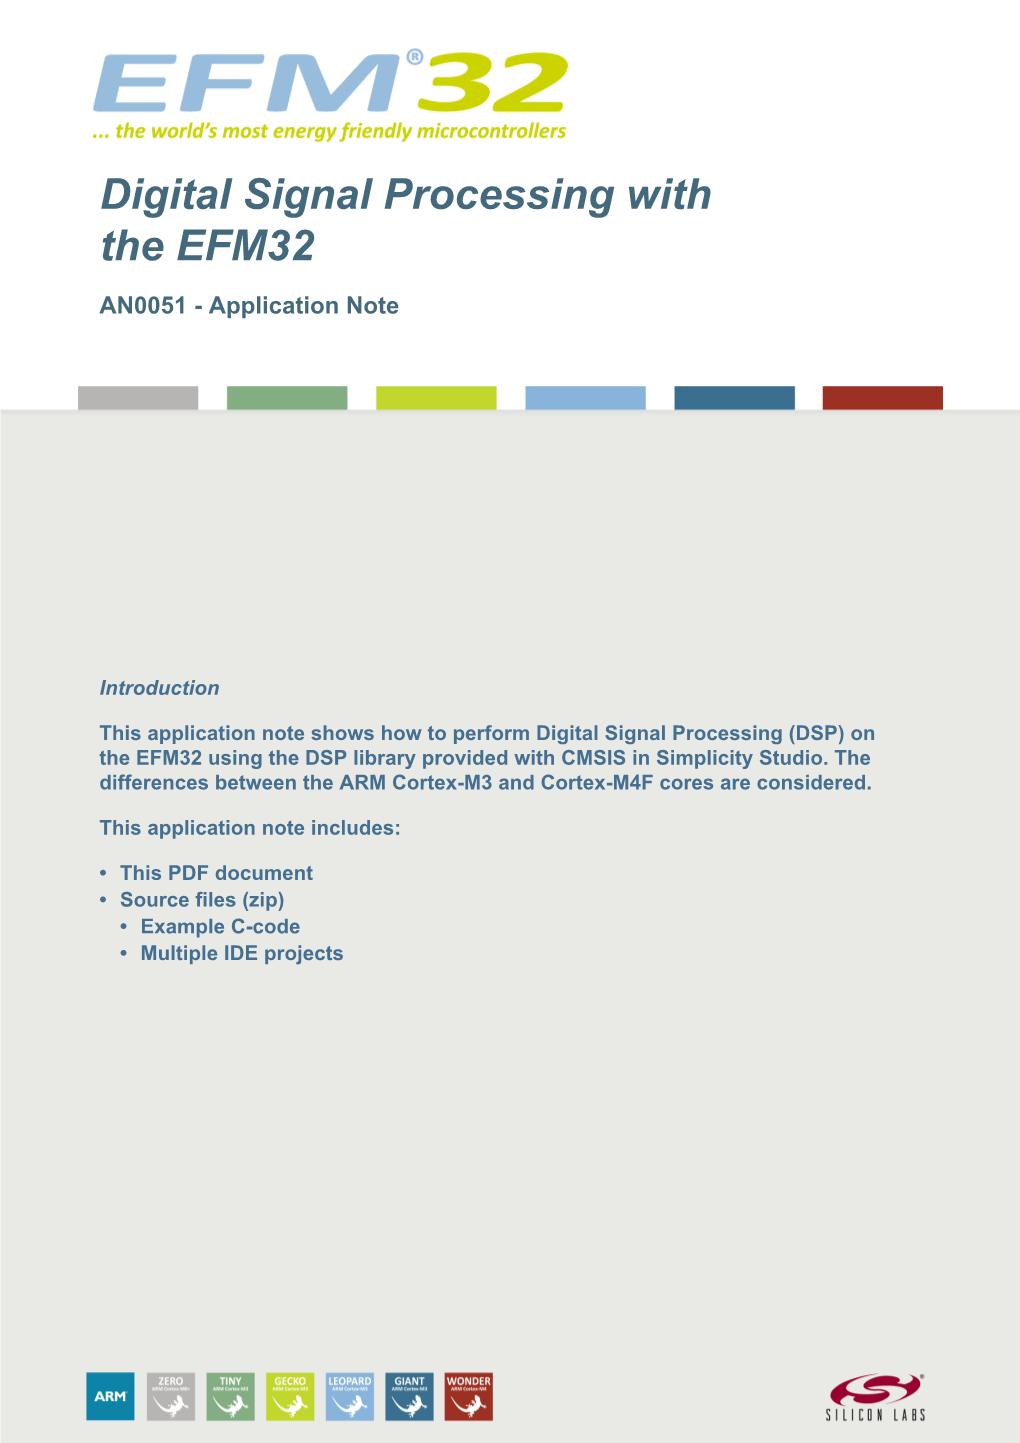 Digital Signal Processing with the EFM32